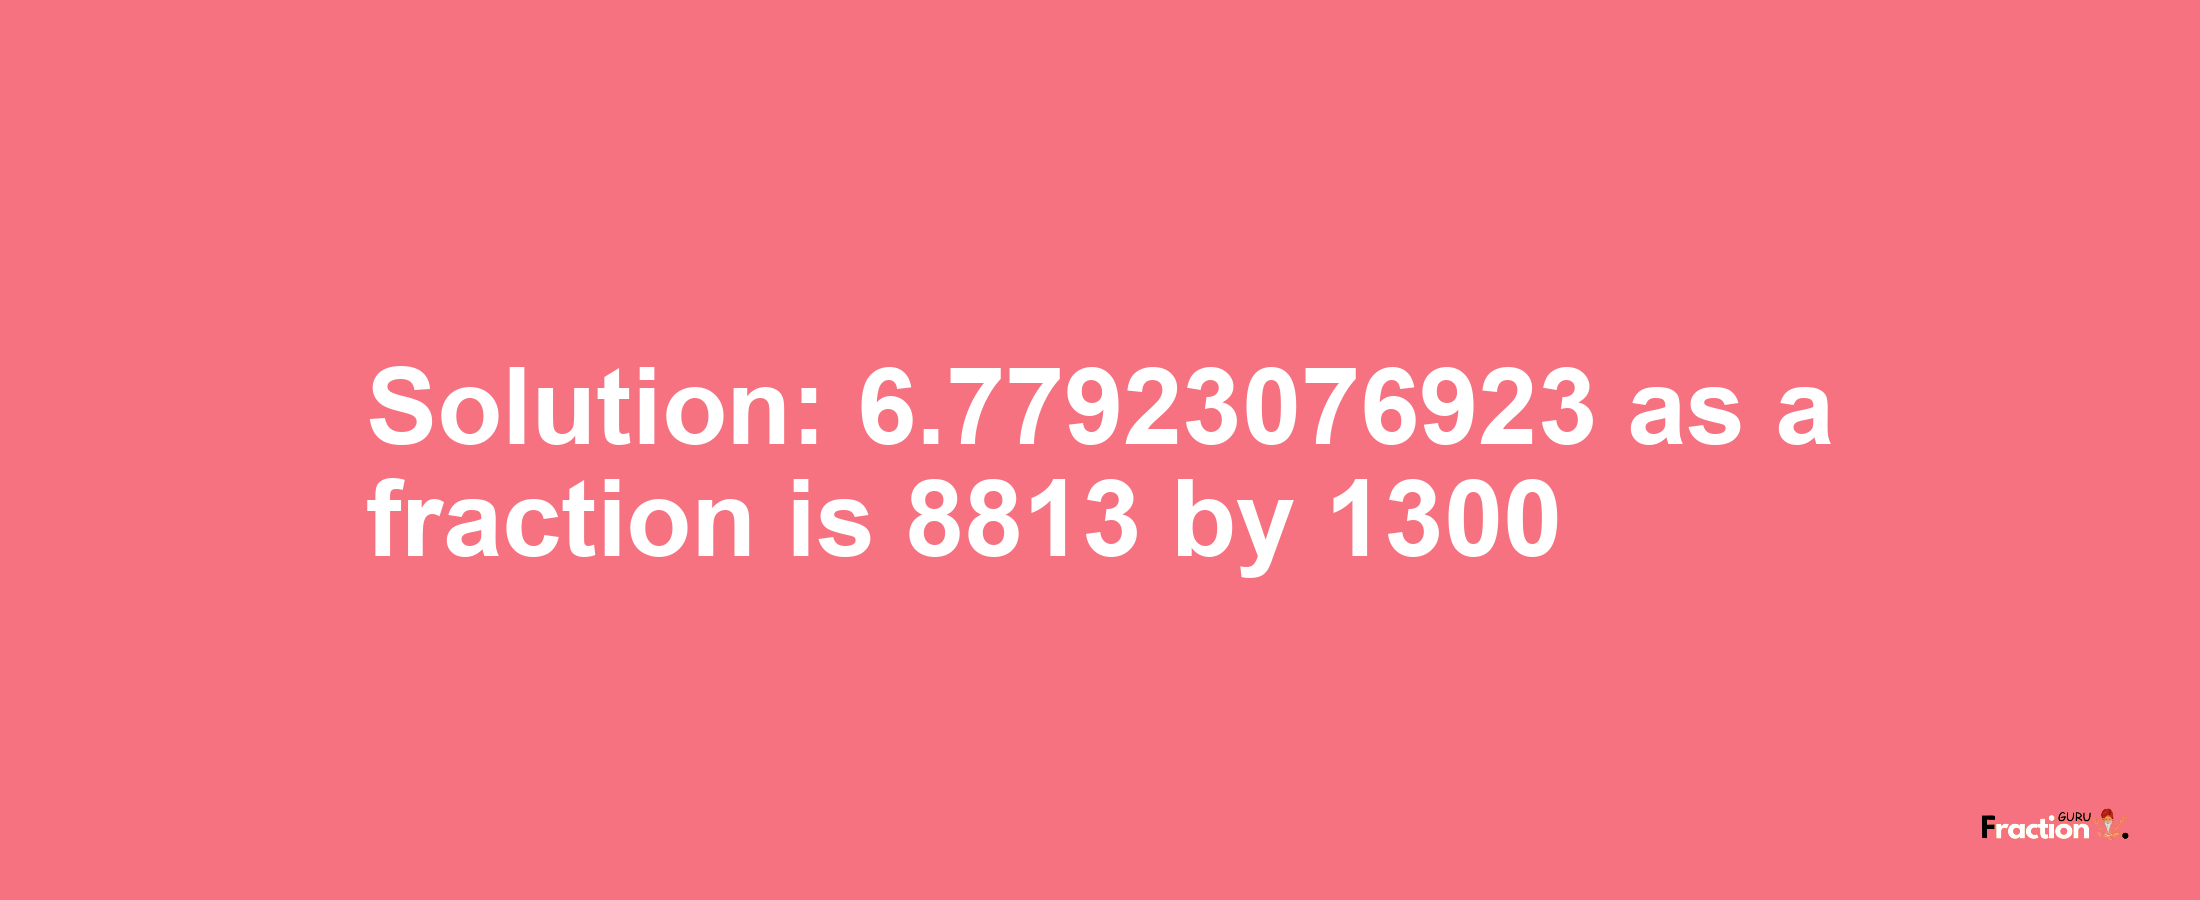 Solution:6.77923076923 as a fraction is 8813/1300